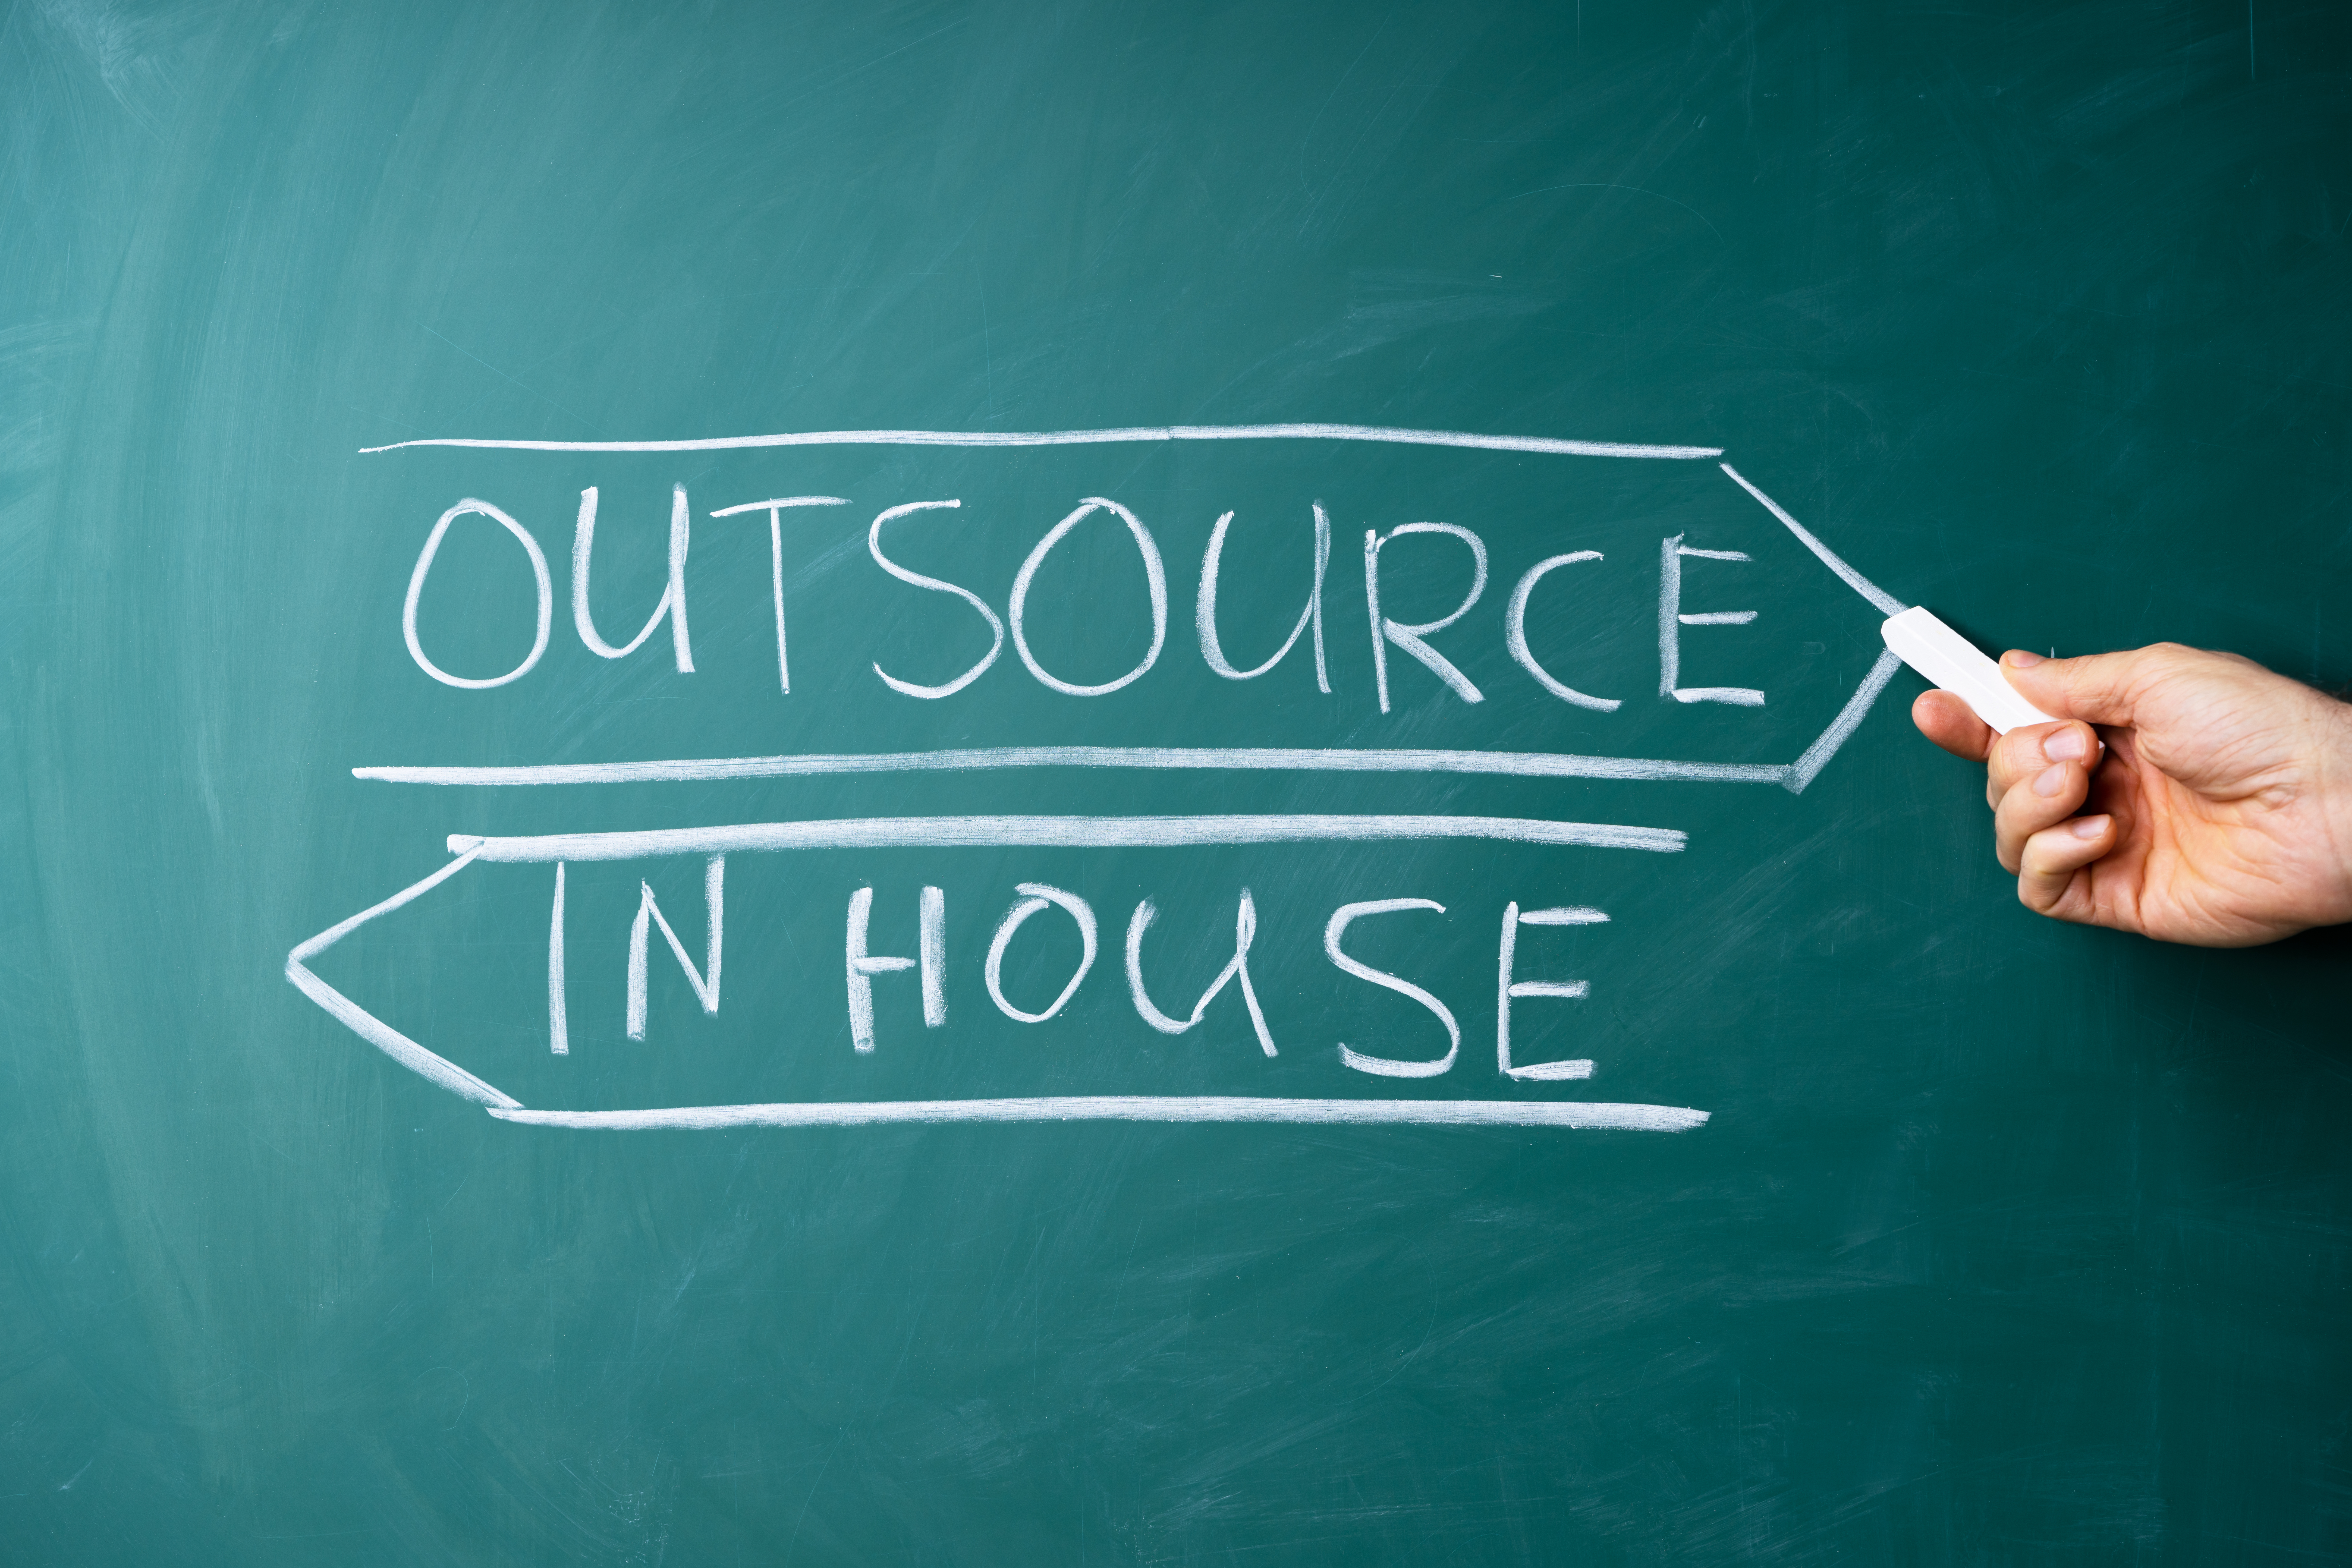 "Outsourced marketing" and "in house" written on a chalkboard